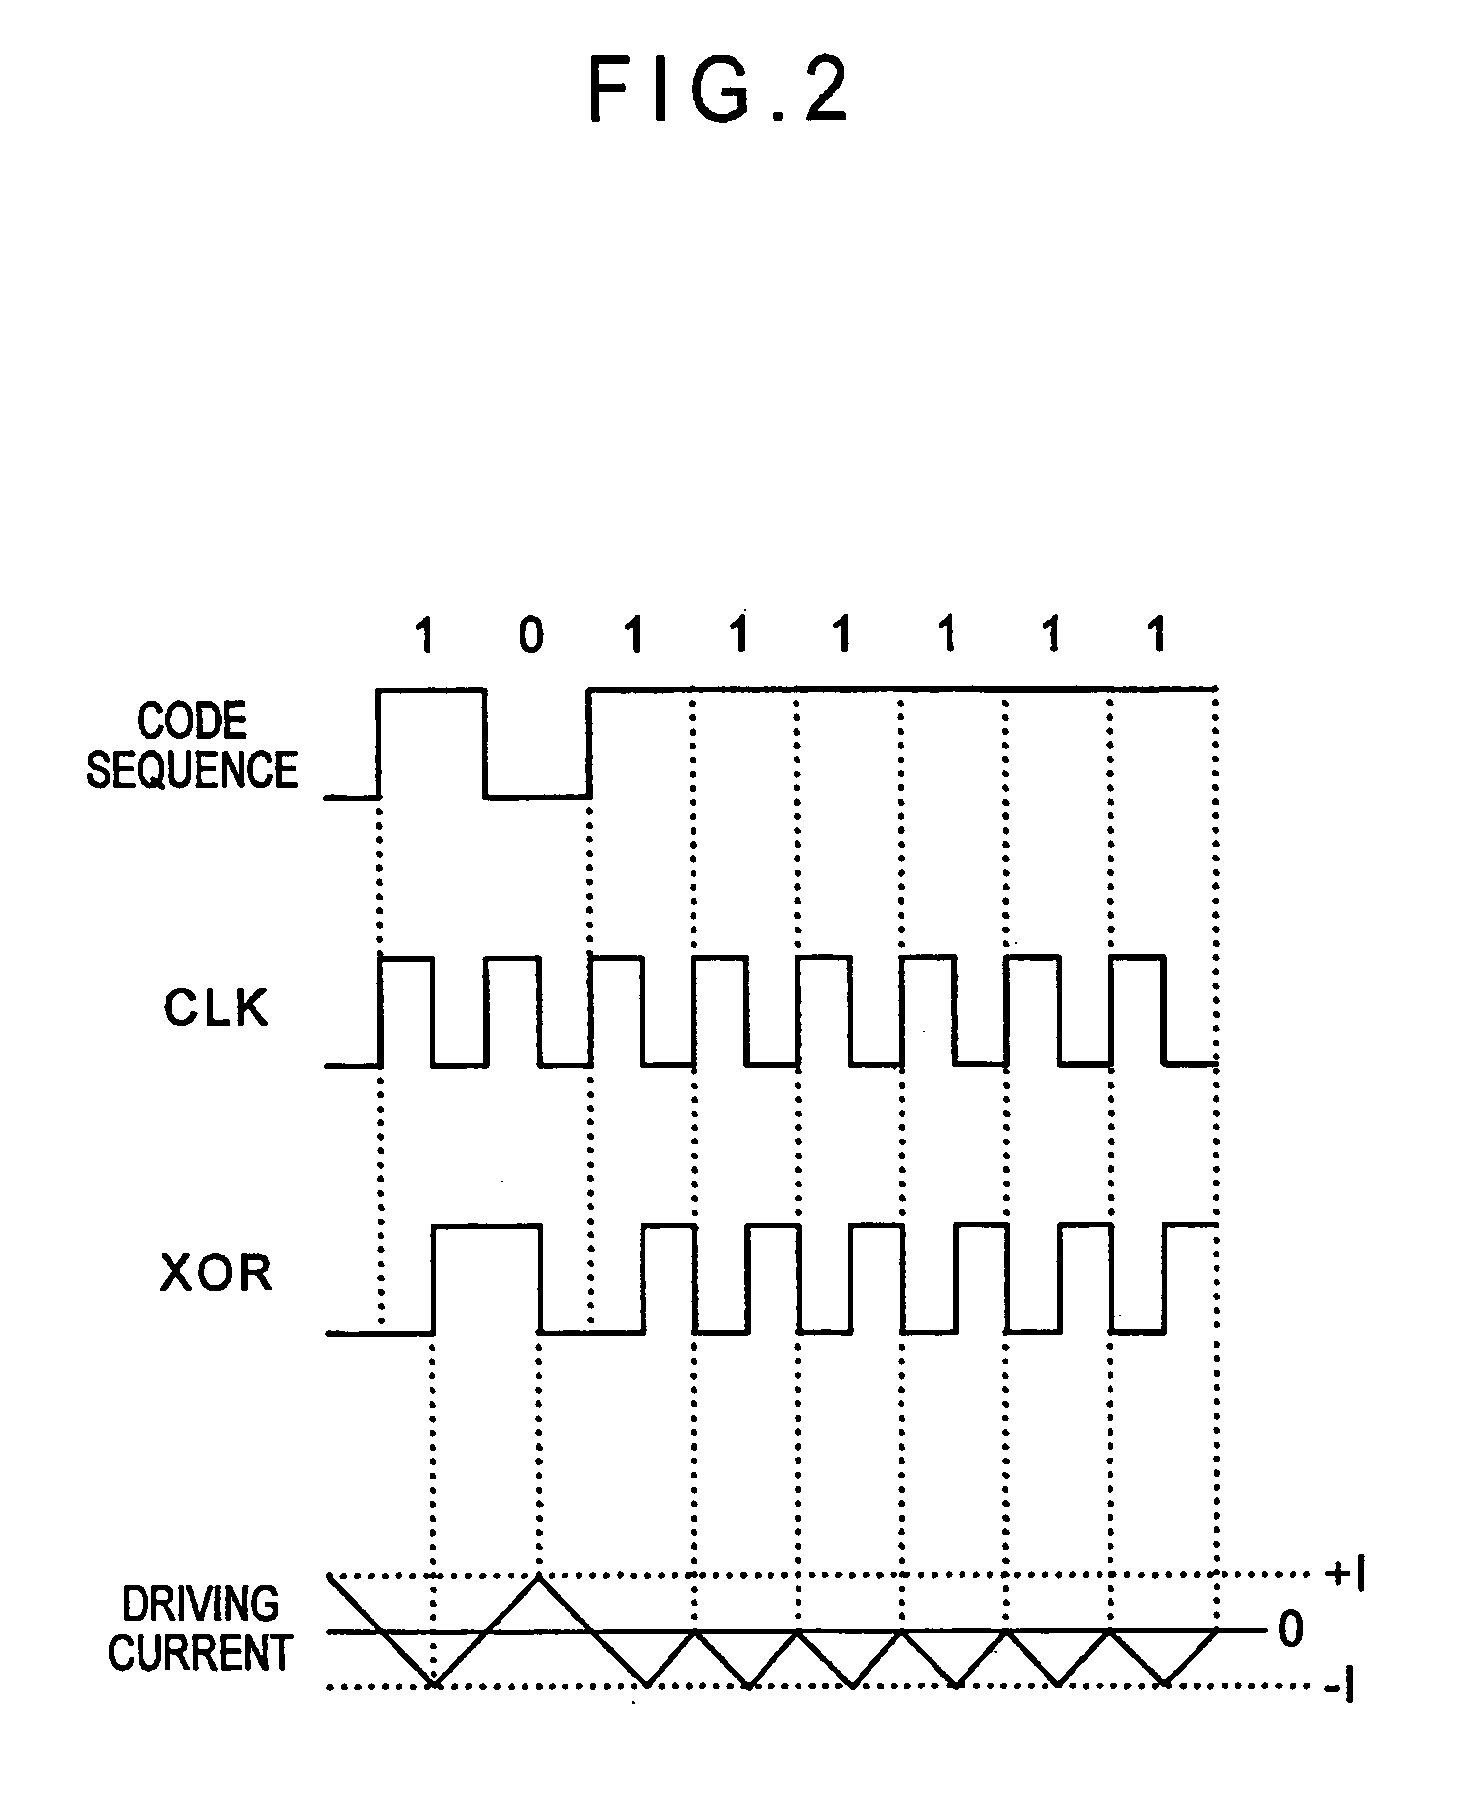 Relative position and/or posture measuring system for measuring relative positions and/or relative postures using a magnetic field generator and a magnetic field detector